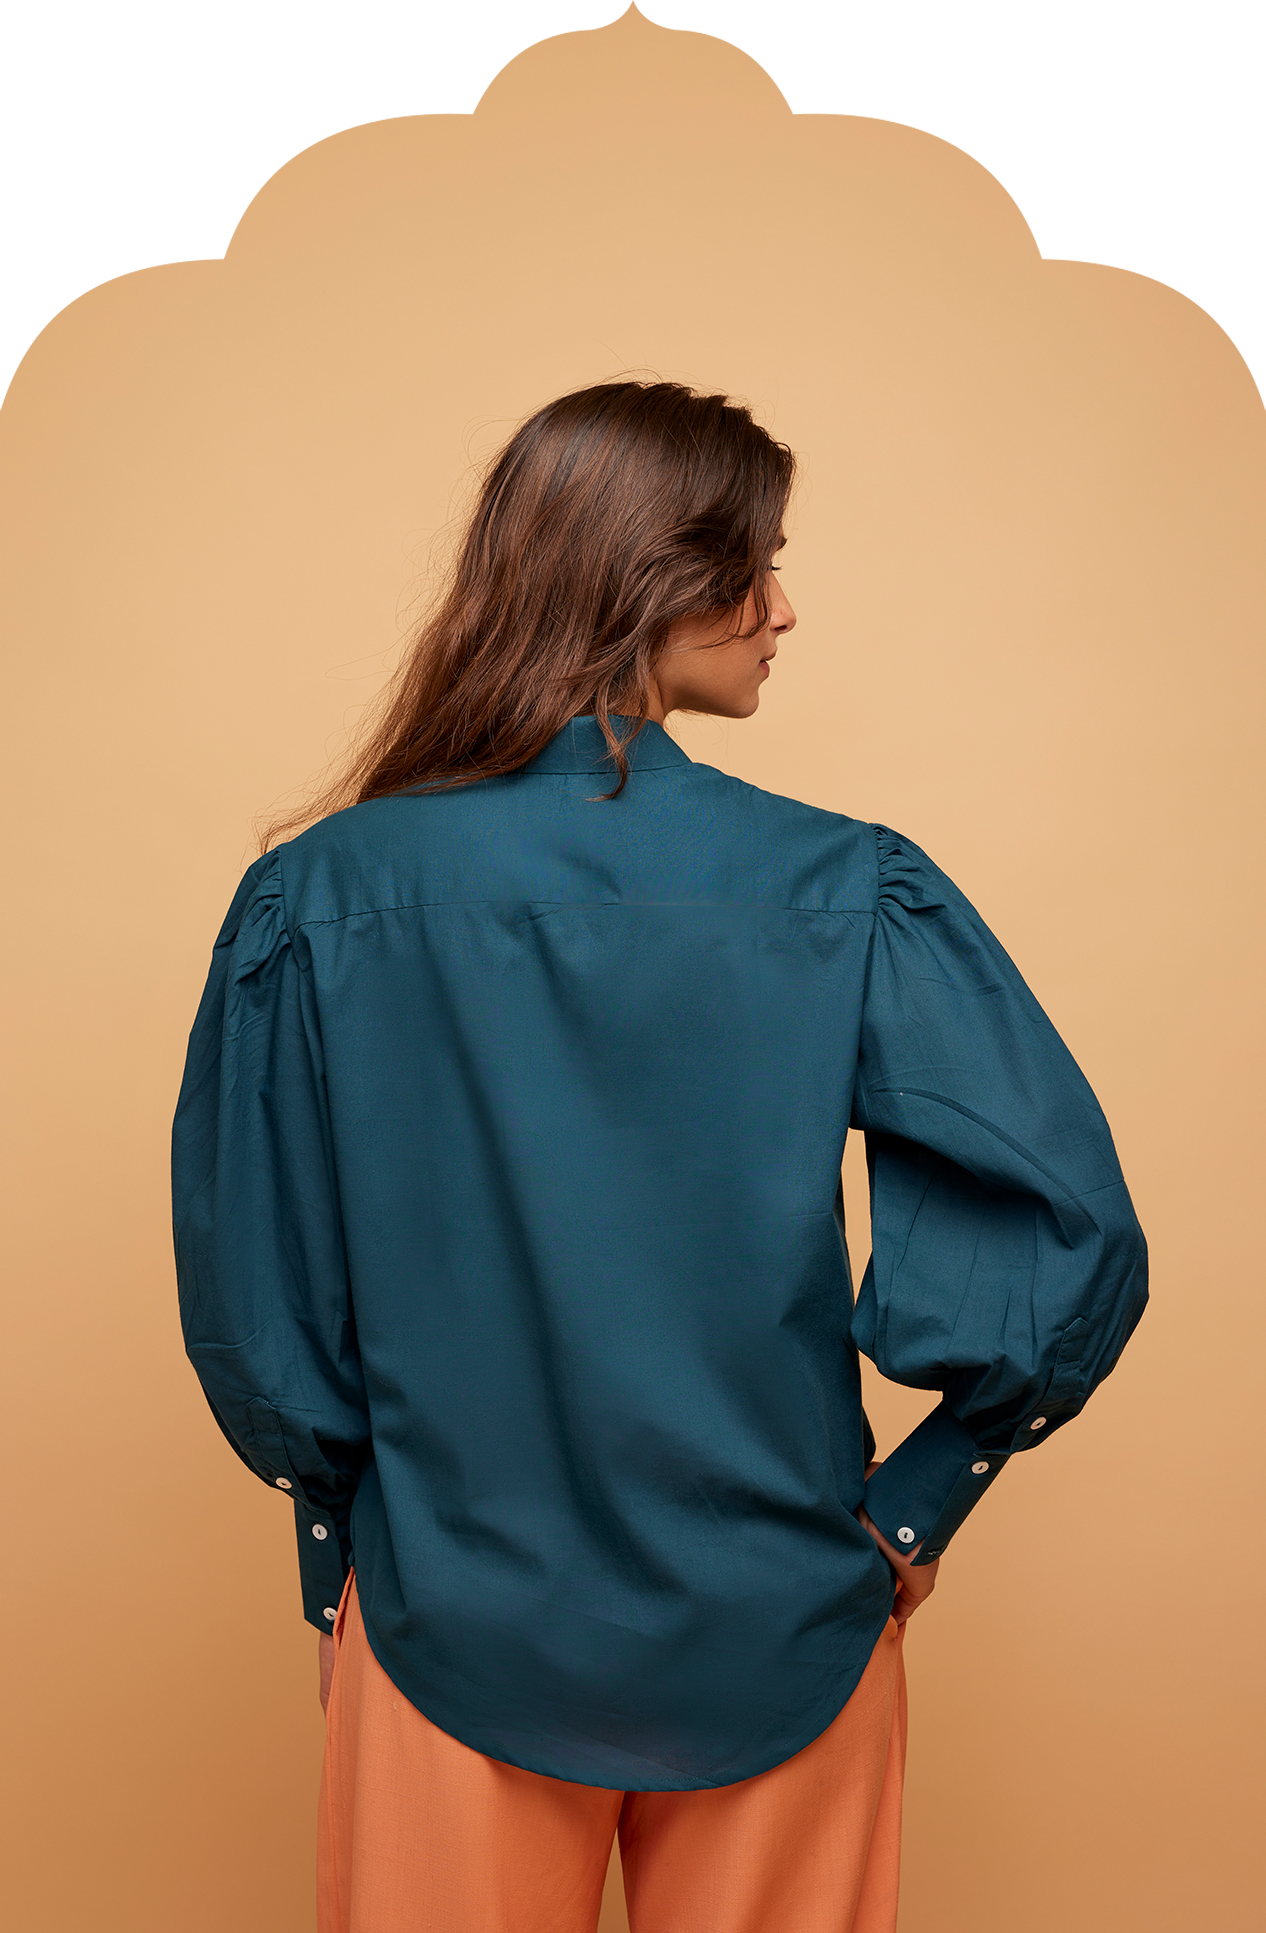 Women's Teal Shirt with Balloon Sleeves